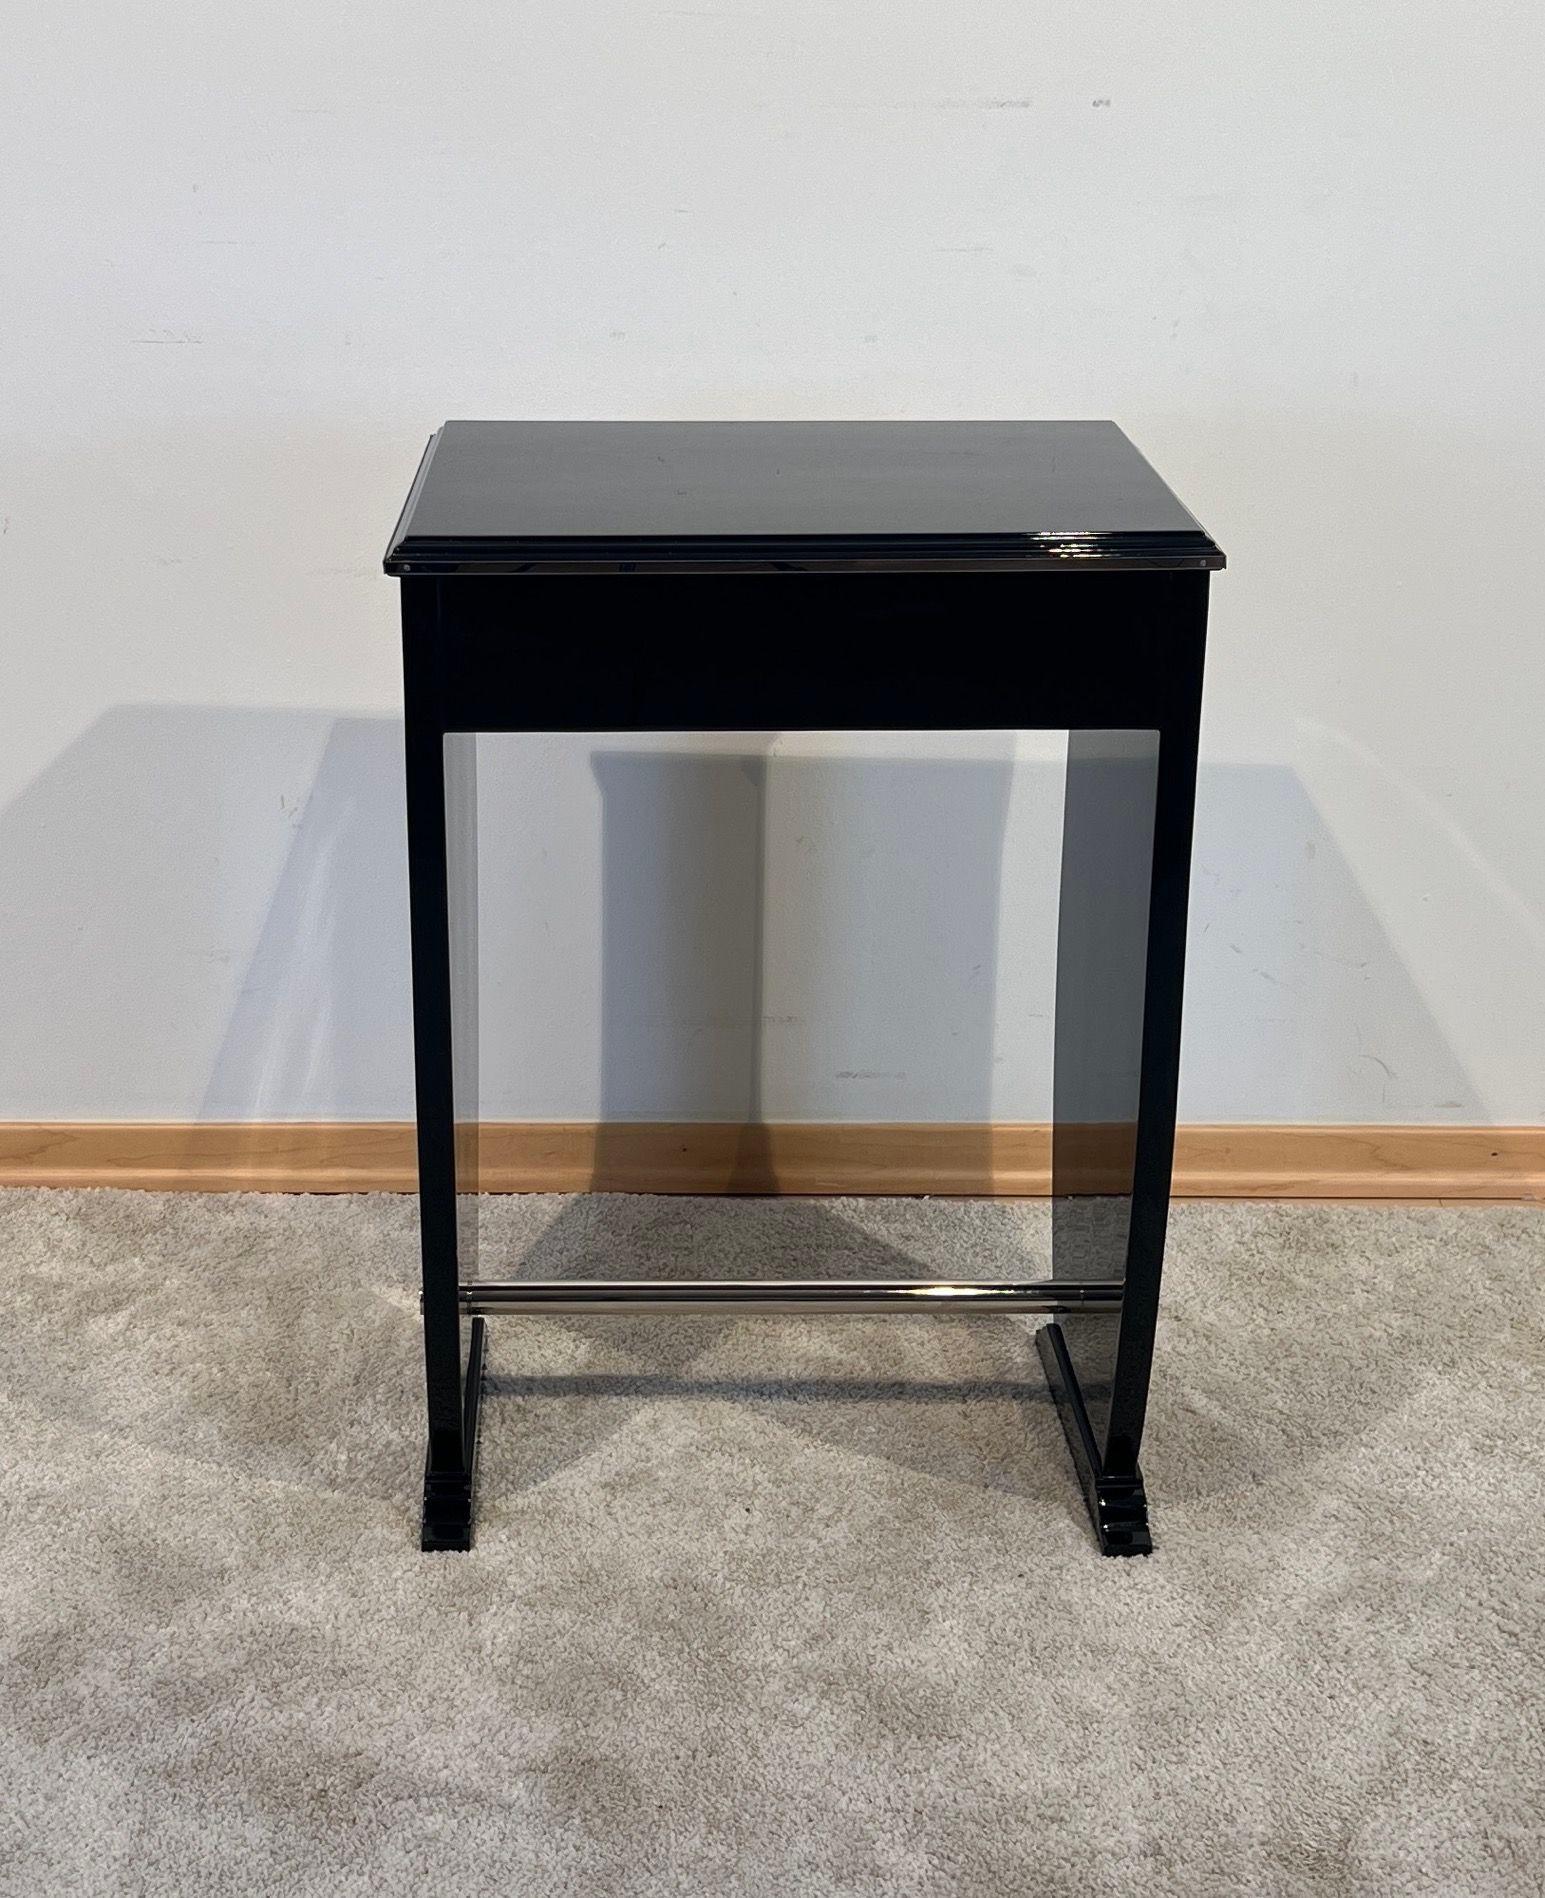 Art Deco Side Table with Drawer, Black Lacquer and Chrome, France circa 1930 For Sale 1